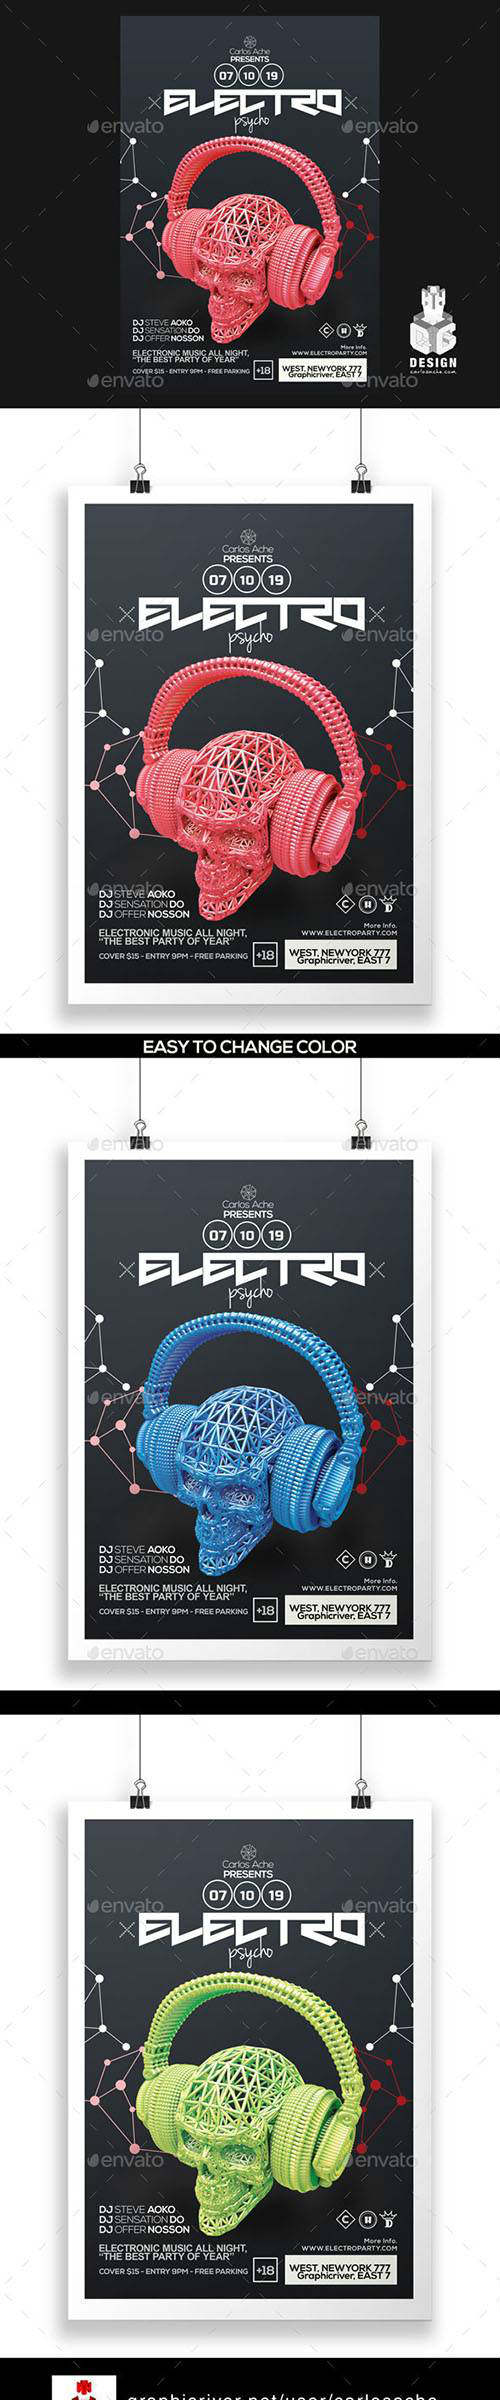 Electro Psycho Poster - Flyer Template id 12145305 (Graphicriver)